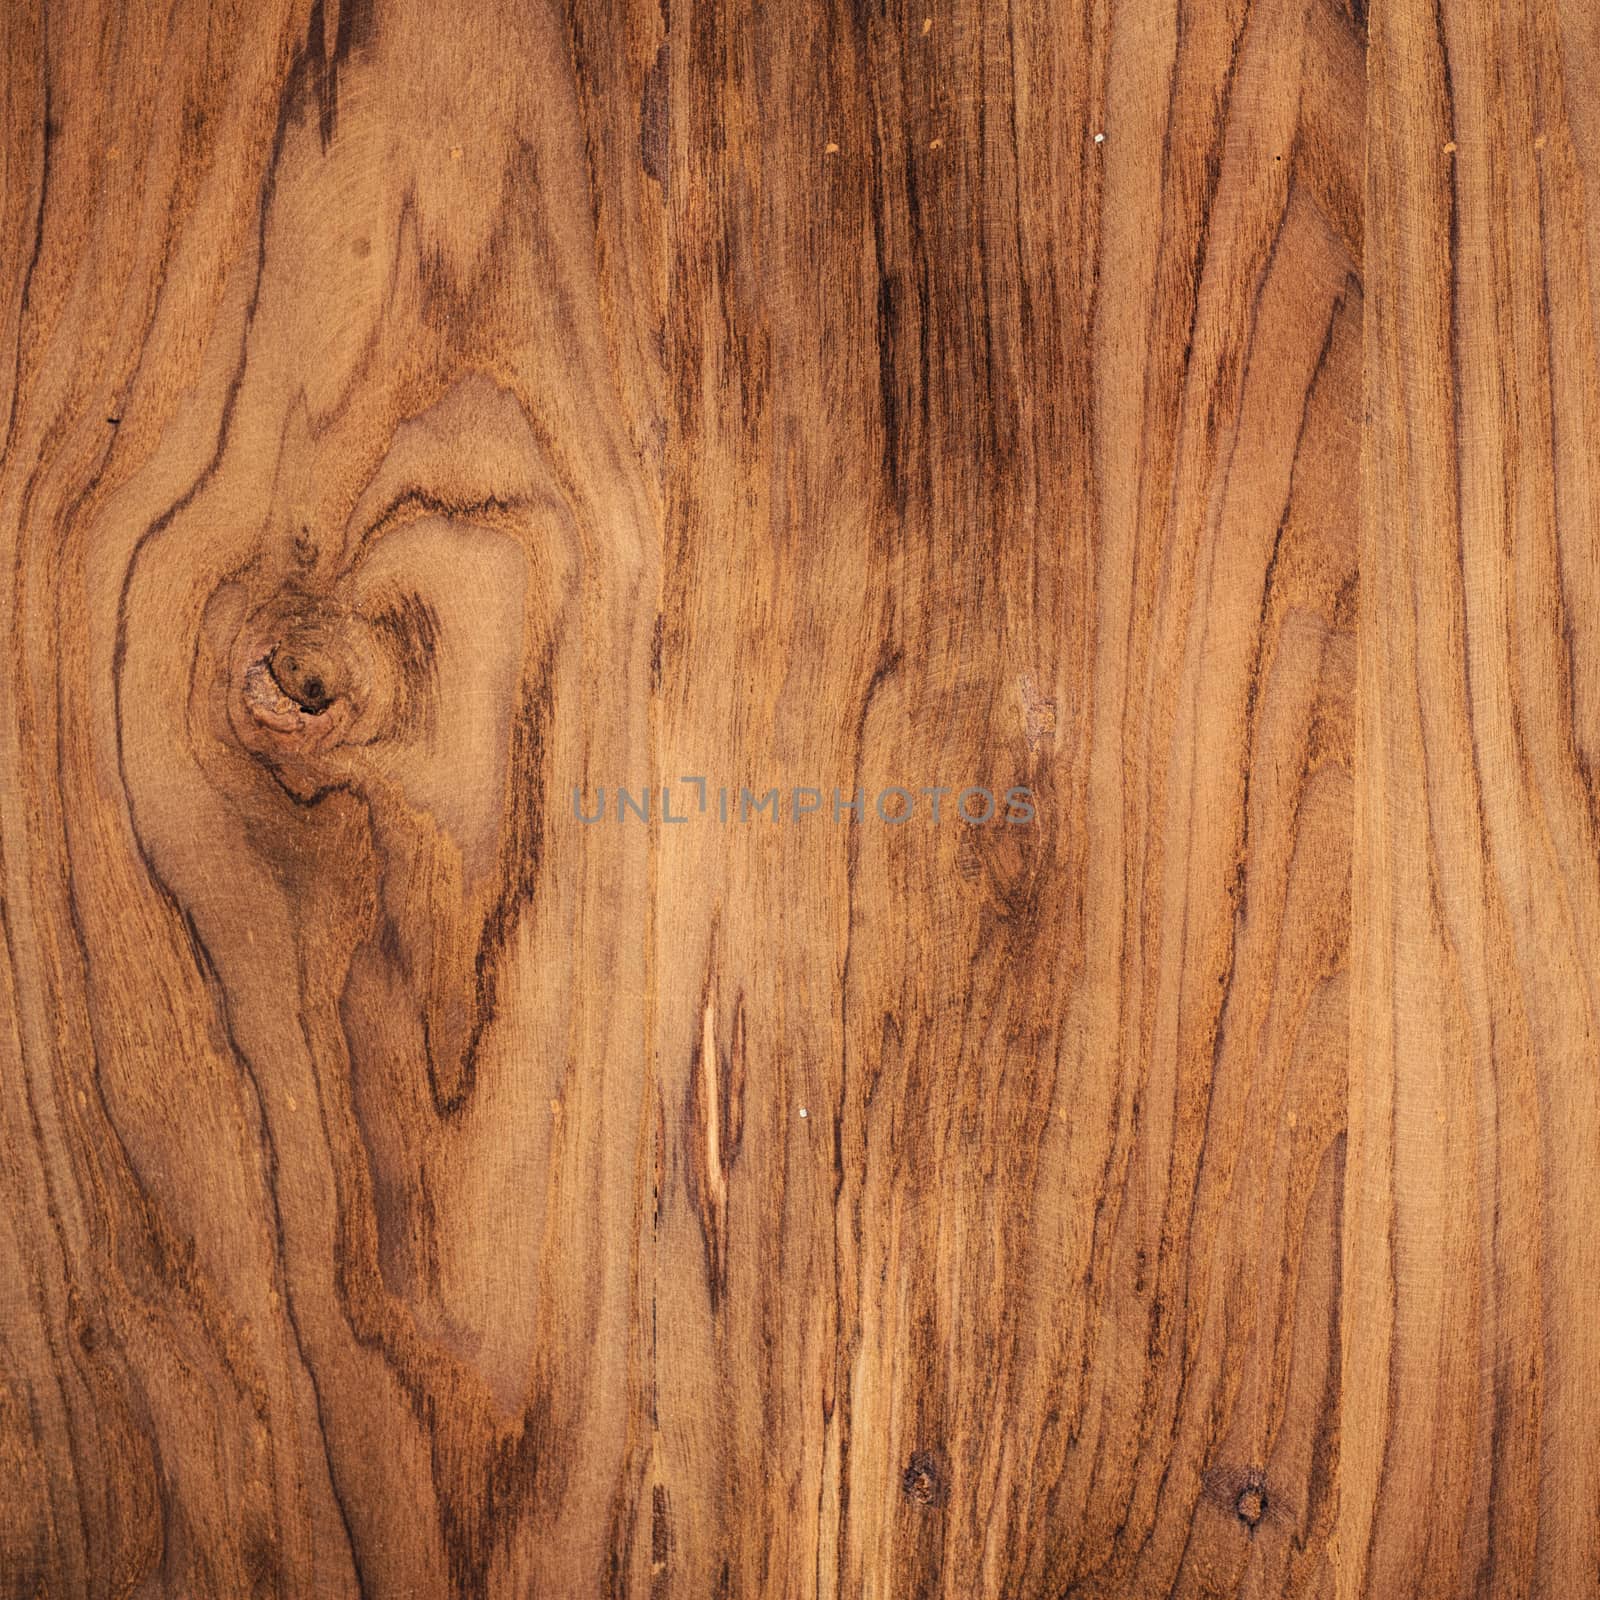 Old teak wood texture surface close up photo. liner pattern on wooden structure.